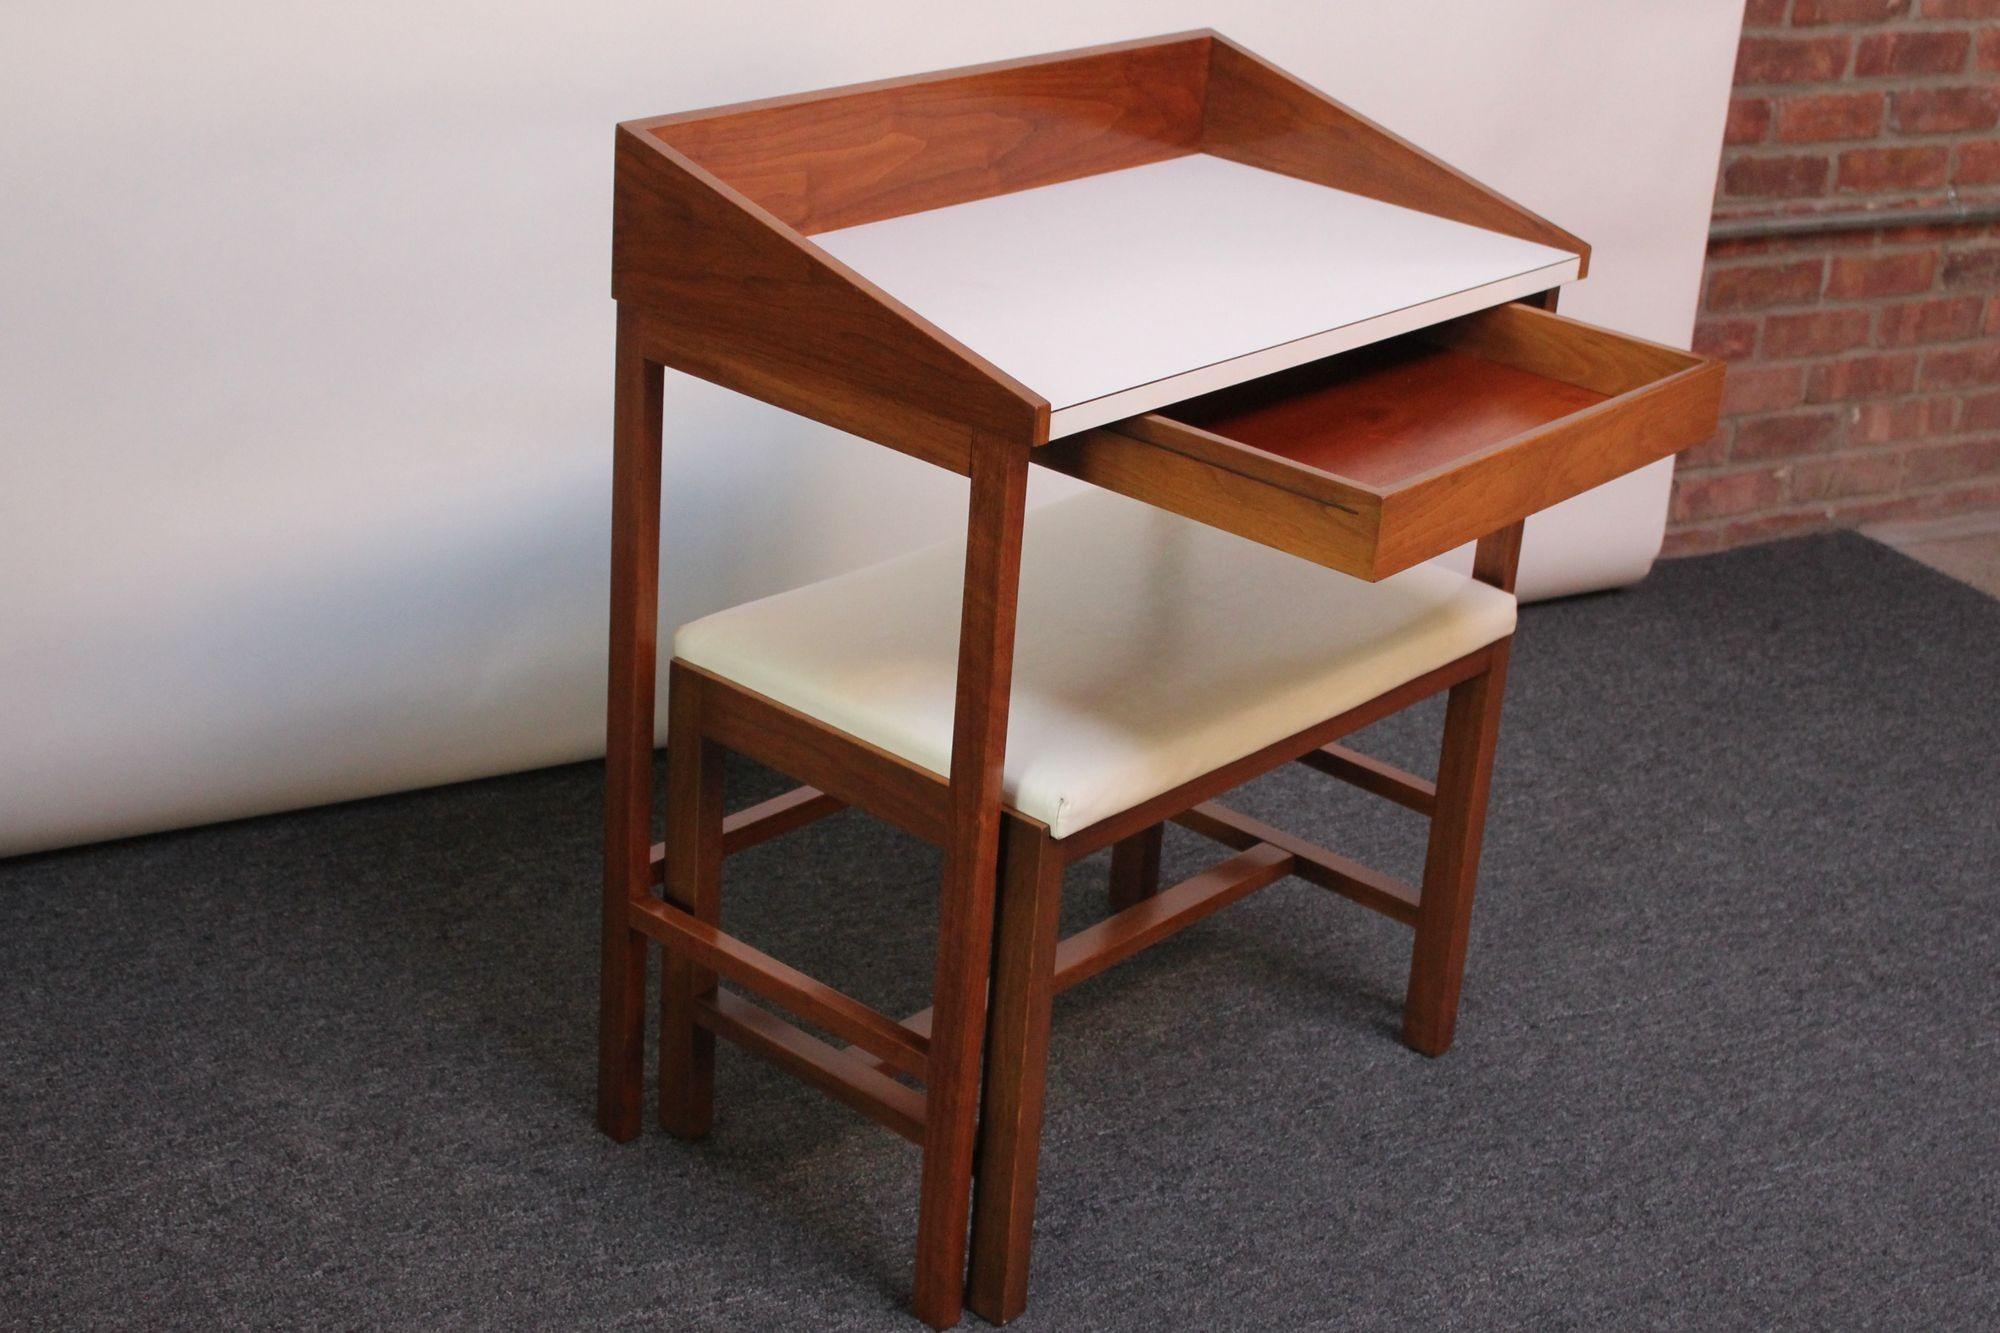 Vintage mahogany vanity/writing table with corresponding naugahyde stool designed by Edward Wormley for Dunbar (ca. 1950s, Indiana, USA).
Angular form with triangular edges and white laminate surface above a single drawer for storage. 
When not in